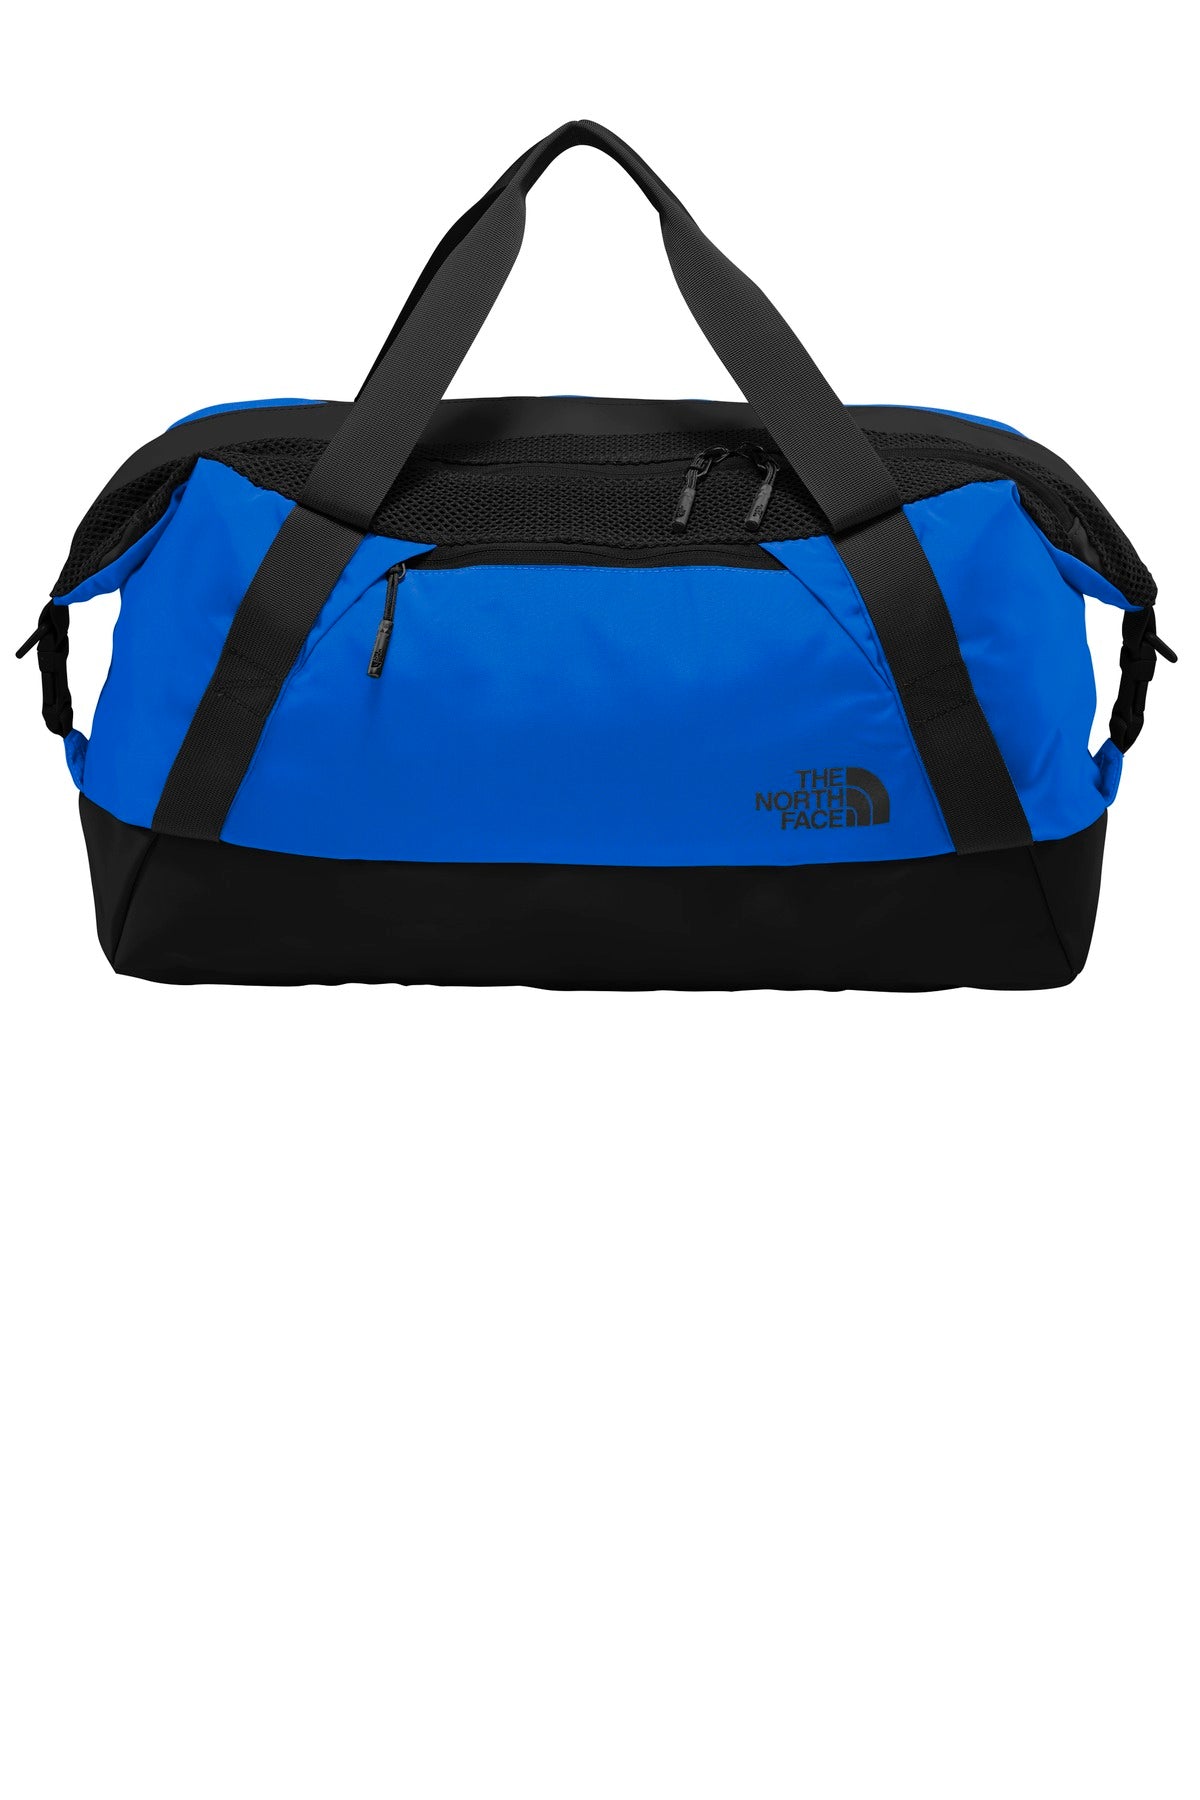 Bags Monster Blue/ Black OSFA The North Face